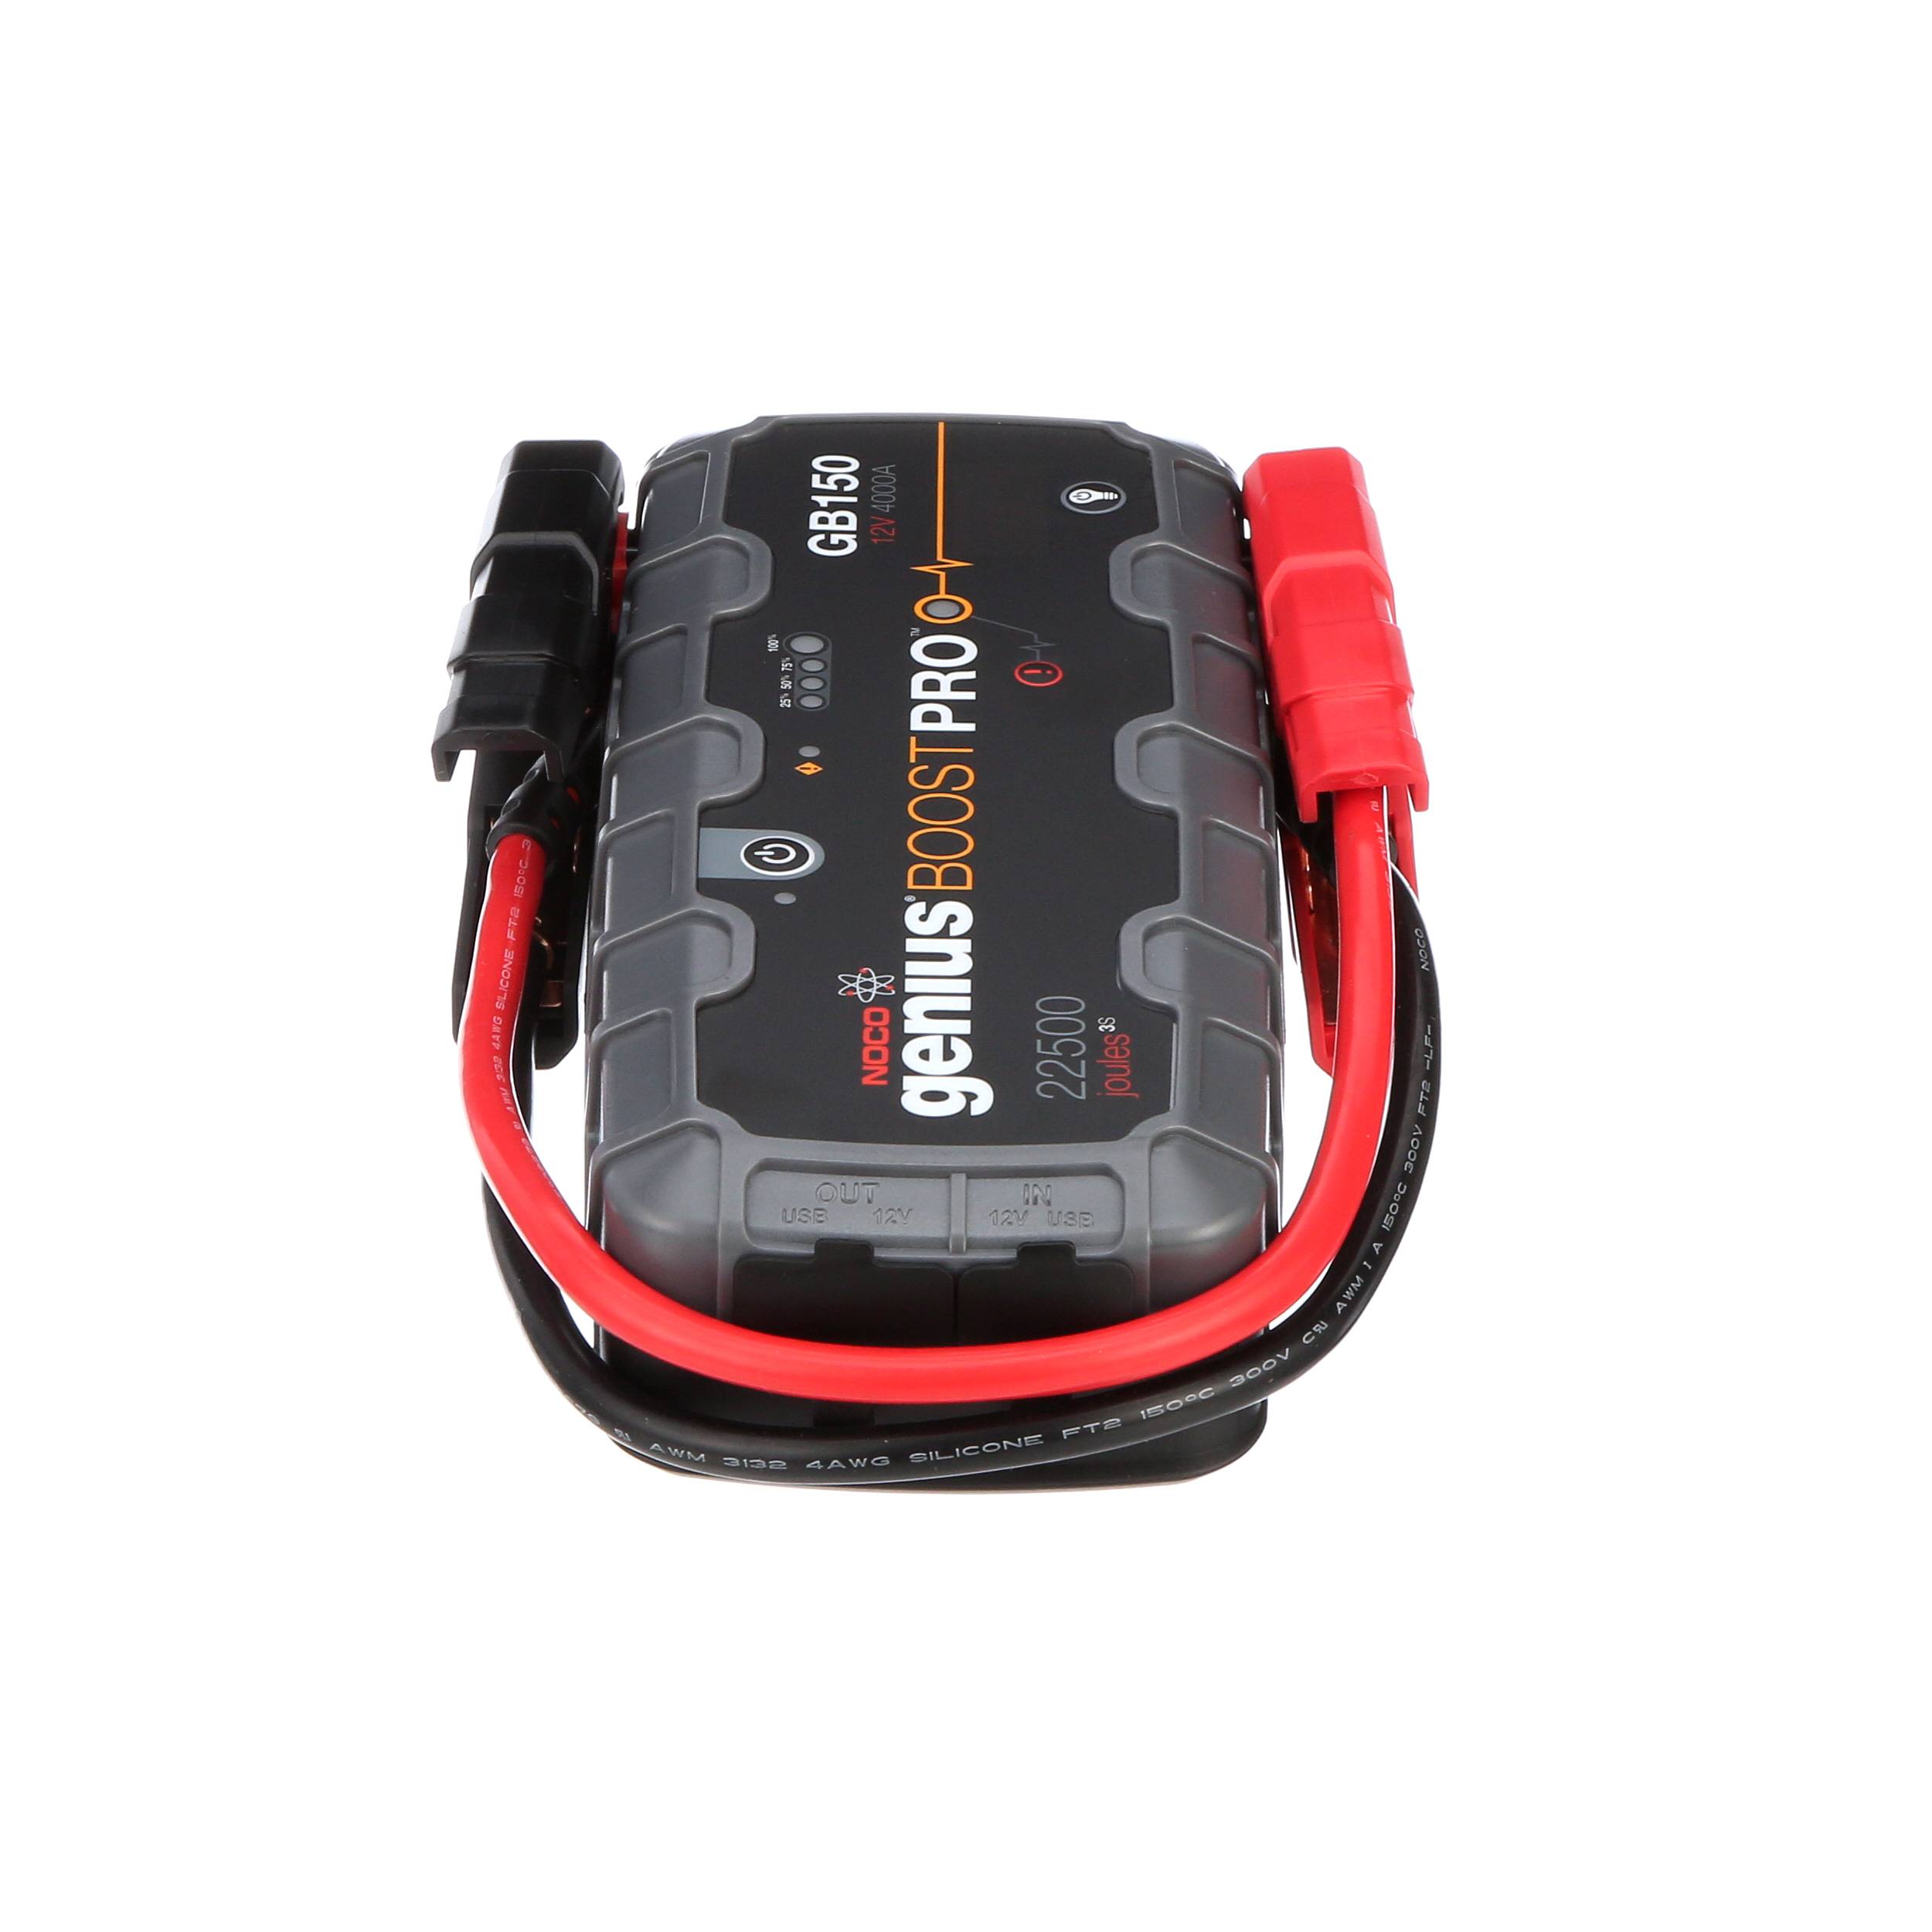 NOCO Boost Pro GB150 3000A 12V UltraSafe Portable Lithium Jump Starter 